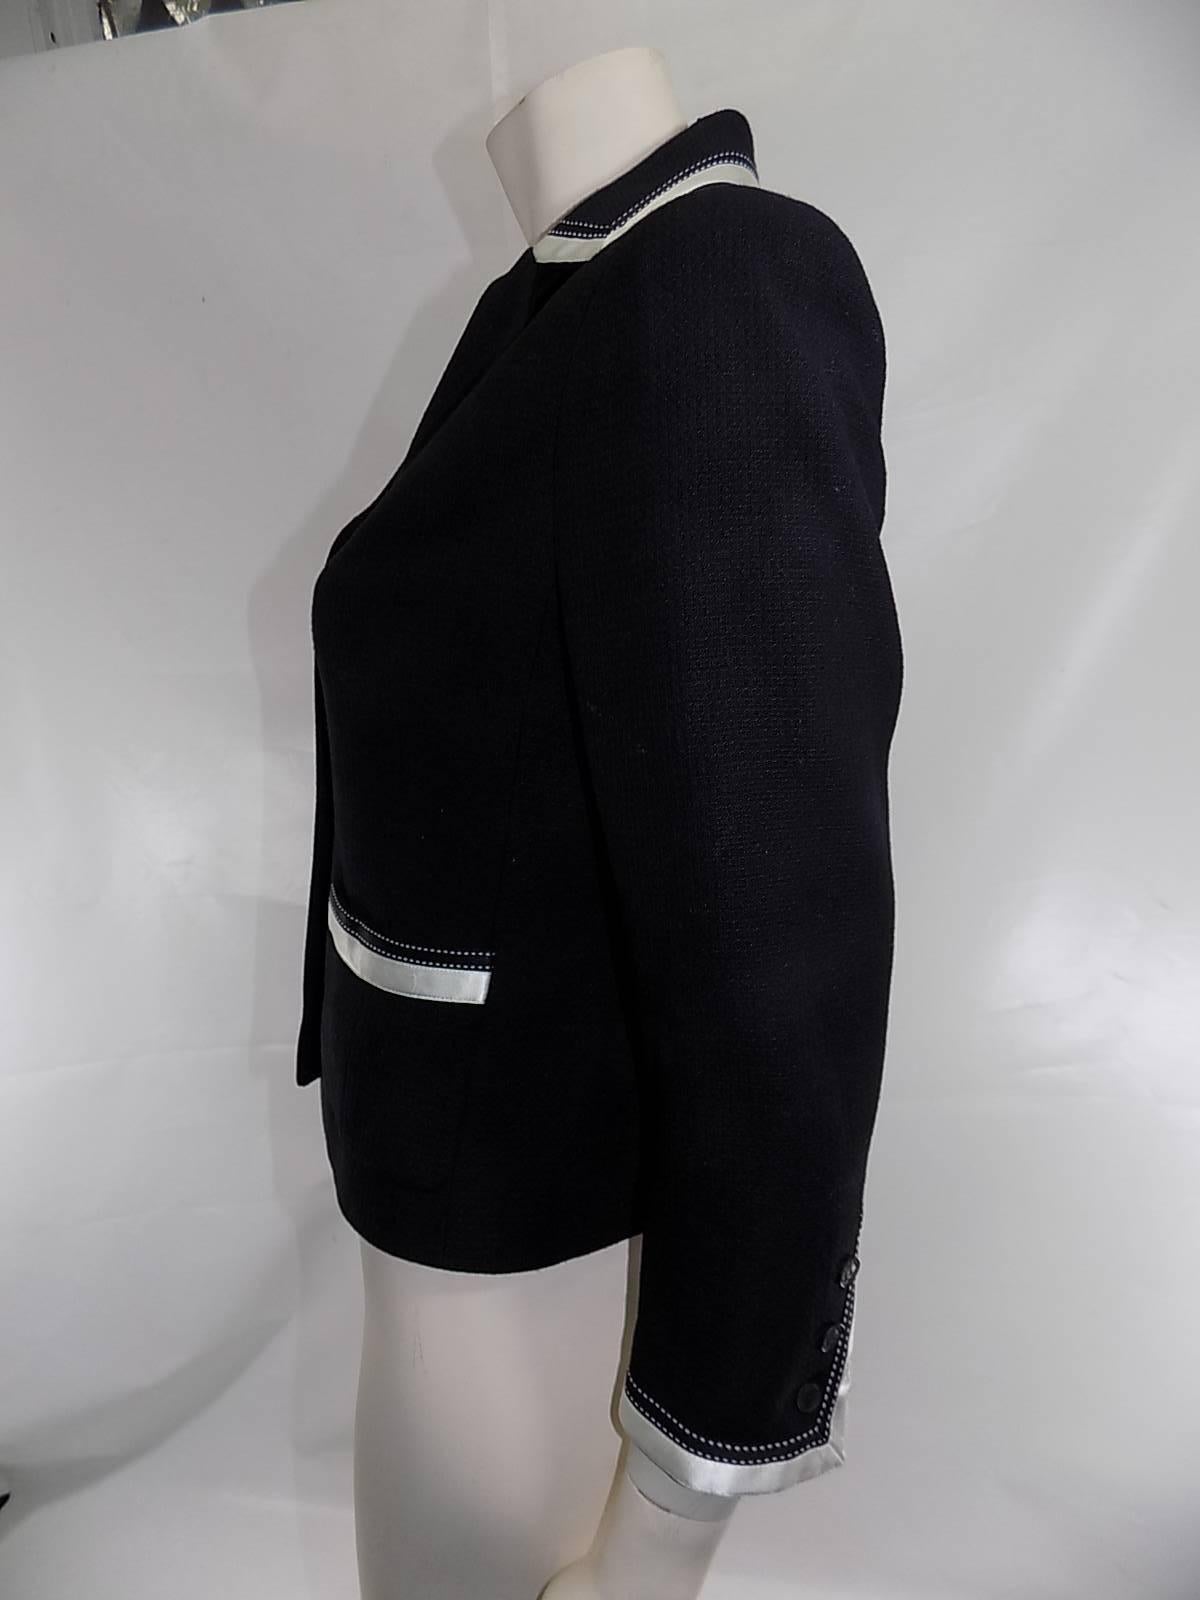 Chanel Black Jacket with white Silk trim Details  In Excellent Condition For Sale In New York, NY